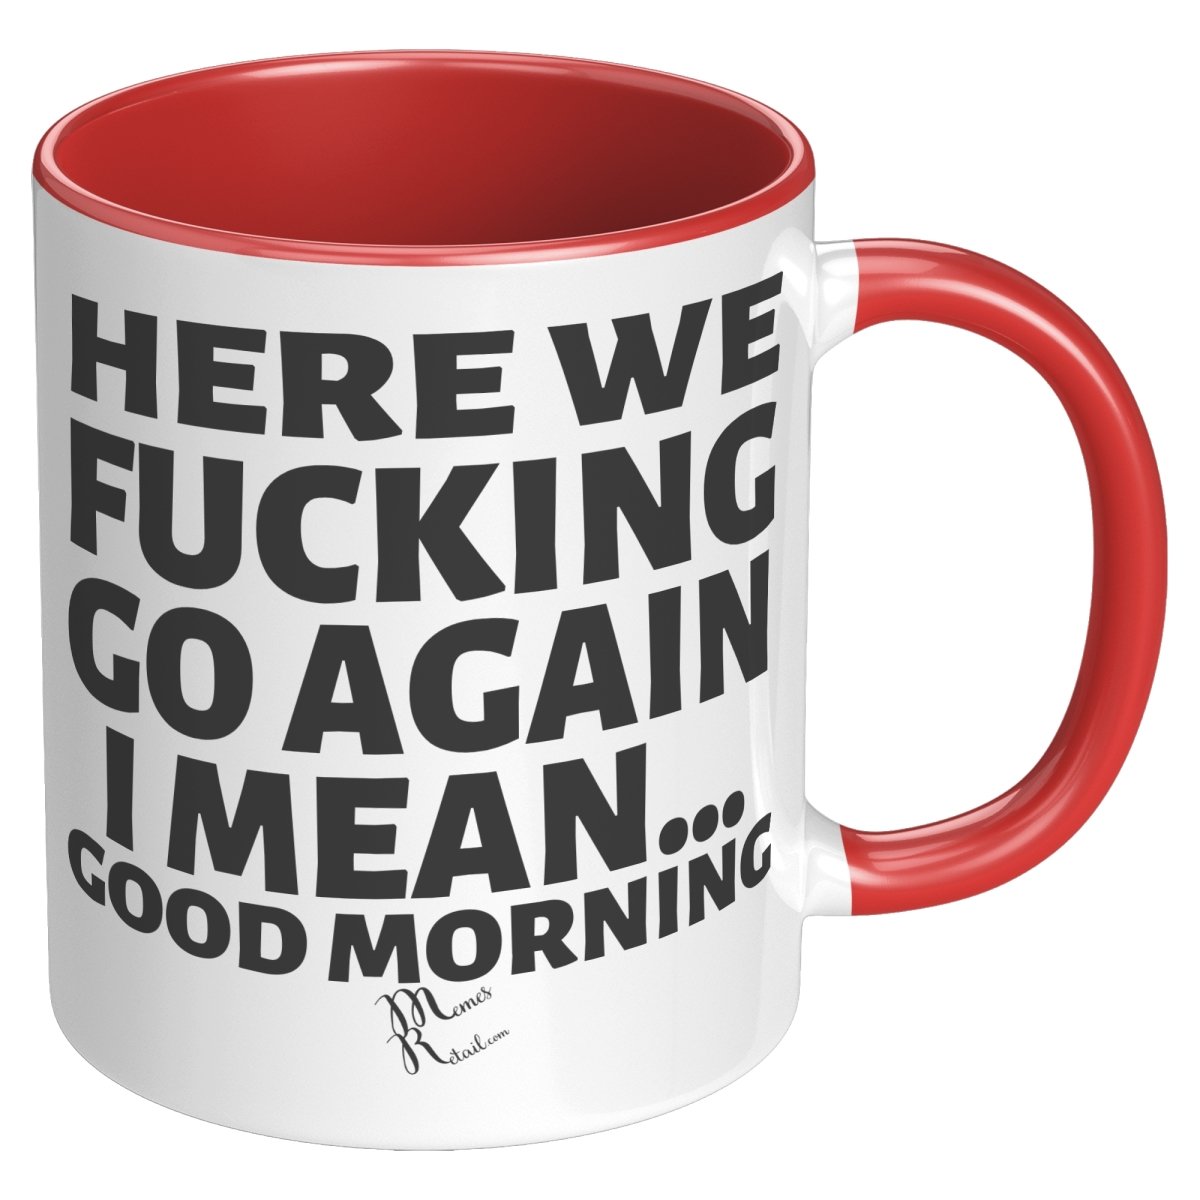 Here We Fucking Go Again, I mean...good morning - Big Lettering Mugs, 11oz / Red Accent - MemesRetail.com